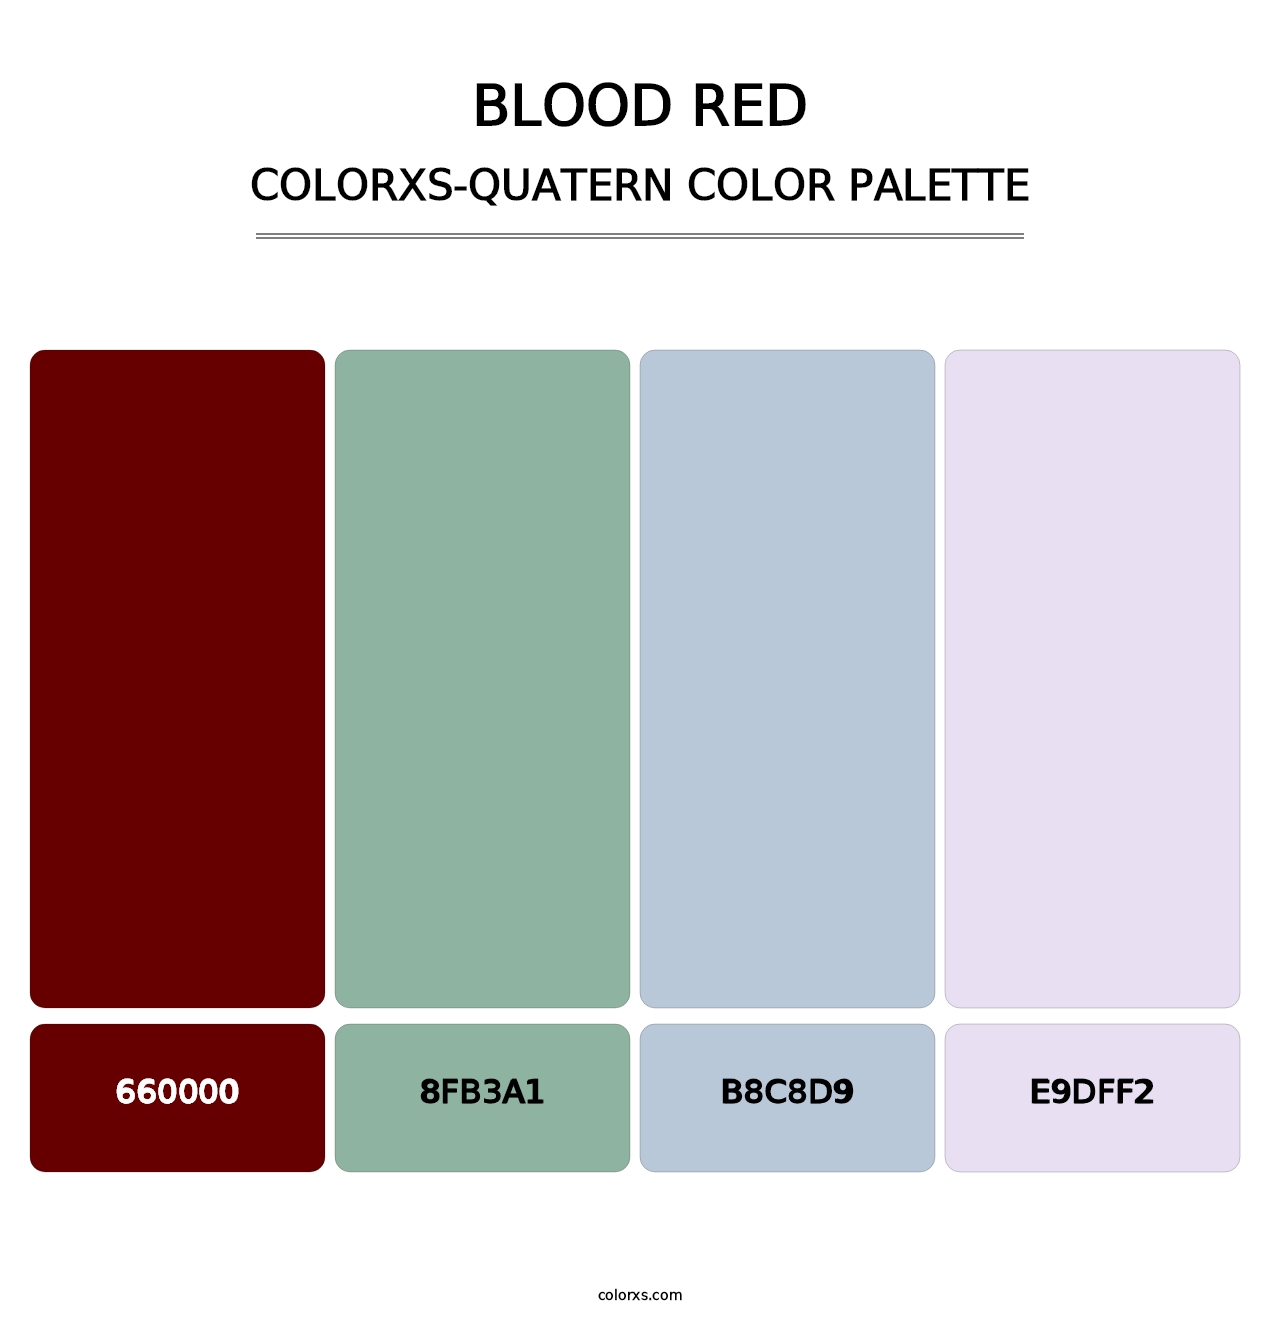 Blood Red - Colorxs Quatern Palette